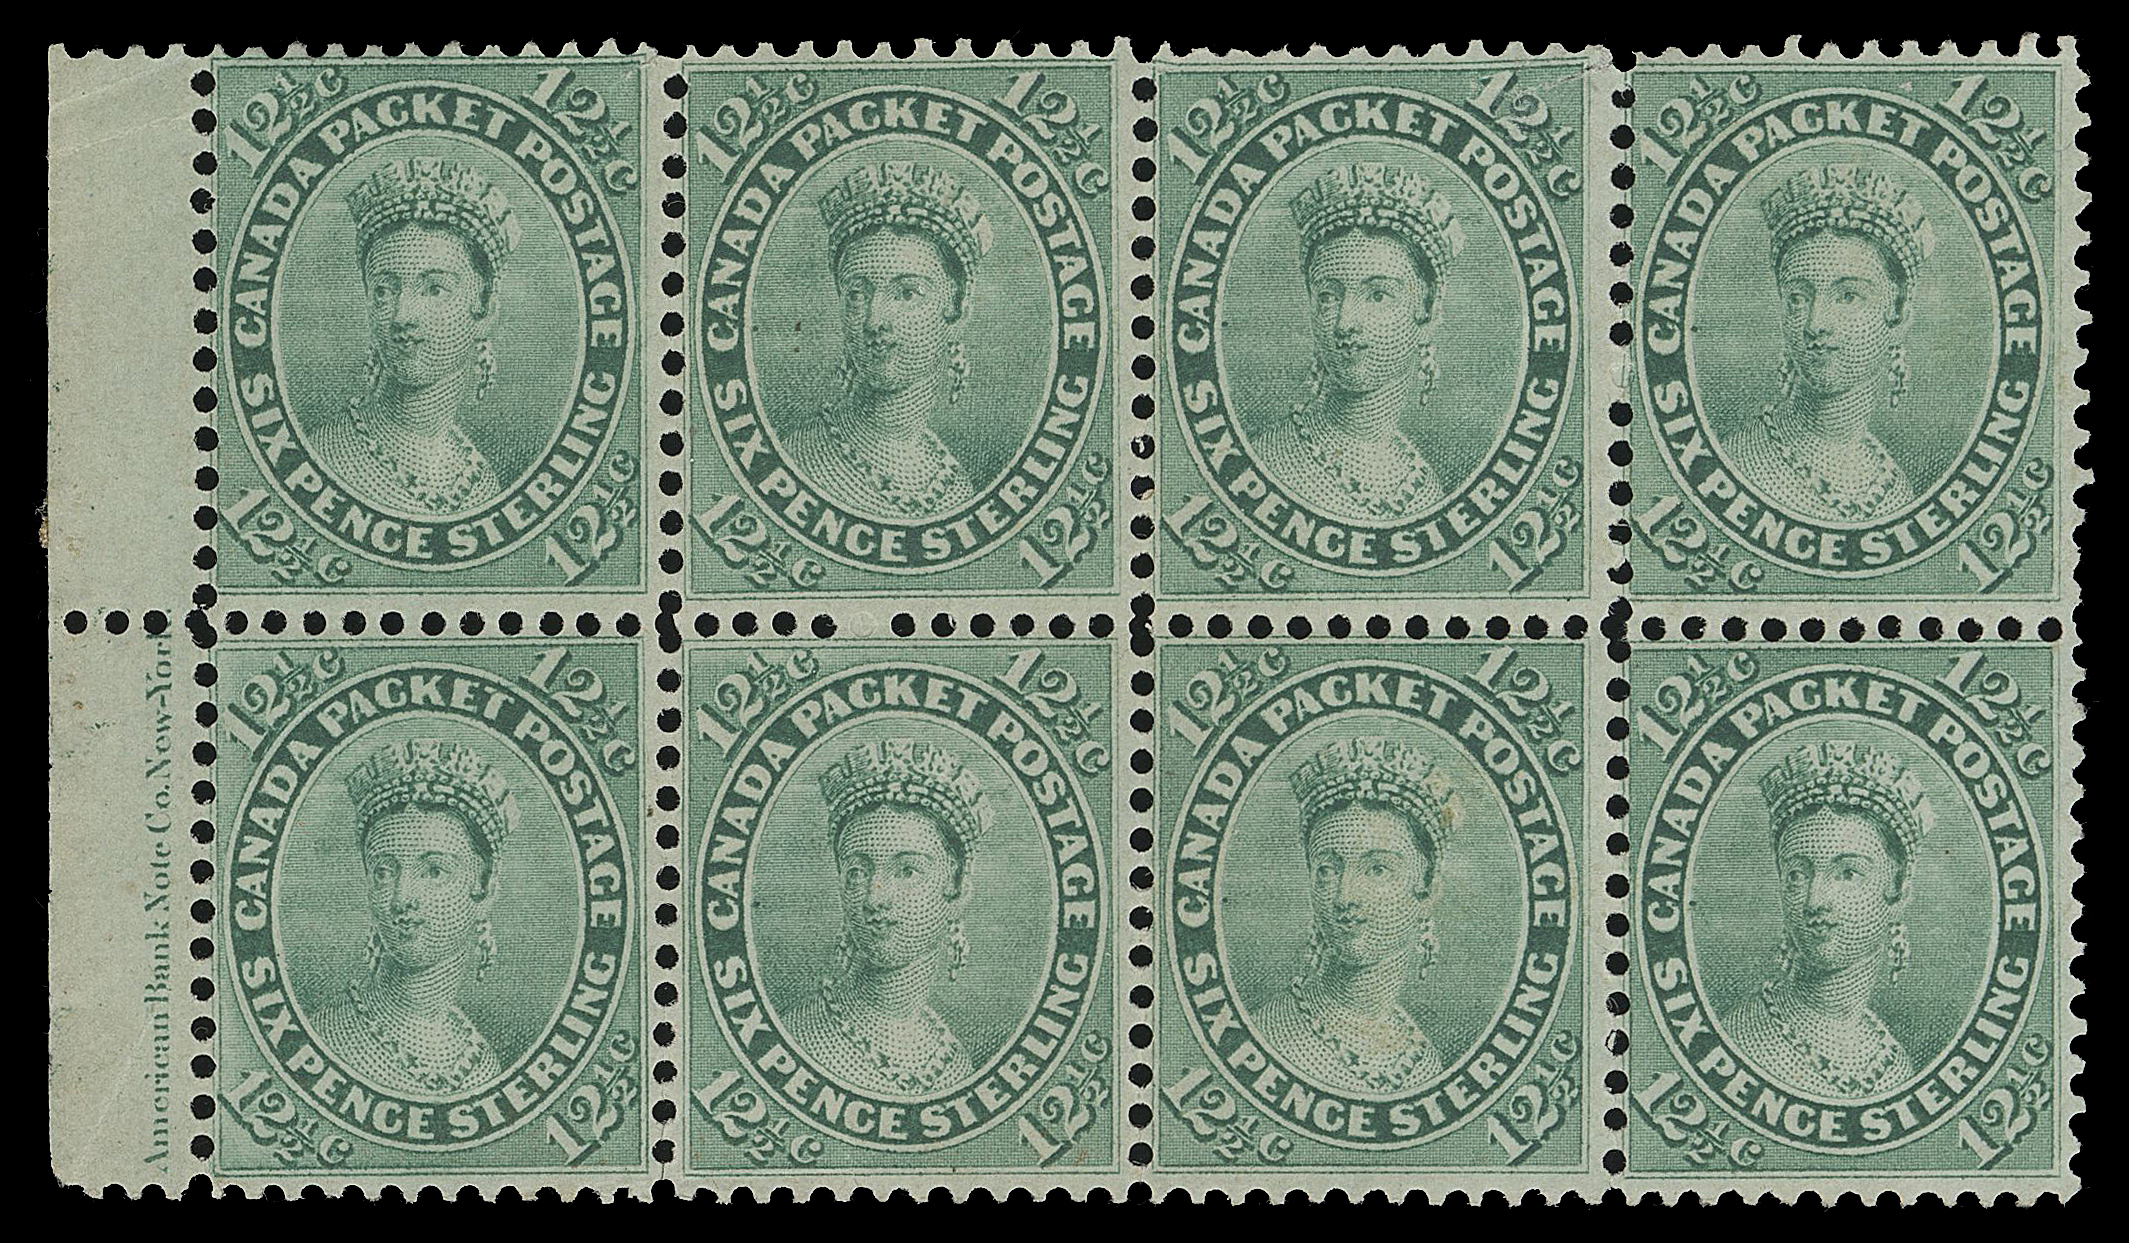 SEVEN AND ONE HALF PENCE AND TWELVE AND ONE HALF CENTS  18a, vii,The spectacular mint block of eight (Positions 61-64 / 71-74), likely THE LARGEST SURVIVING MINT MULTIPLE OF THE TWELVE AND ONE HALF CENT, excellent bright colour on fresh paper and showing complete ABNC imprint in the left margin; diagonal crease on left pair ending in a tiny tear at upper left, small tear on positions 63 and 72. The block features two of the three listed plate varieties - Major Re-entries at Positions 61 and 62 (top left pair). Well centered for the issue with superb colour and impression, intact perforations and showing large part to full original gum, mainly lightly hinged. An extraordinary mint block - the largest we were able to find during our extensive research, VF OG (Unitrade cat. $37,500)

Provenance: Guilford Collection, Siegel Auctions, September 1994; Lot 2188
The "Lindemann" Collection (private treaty, circa. 1997)